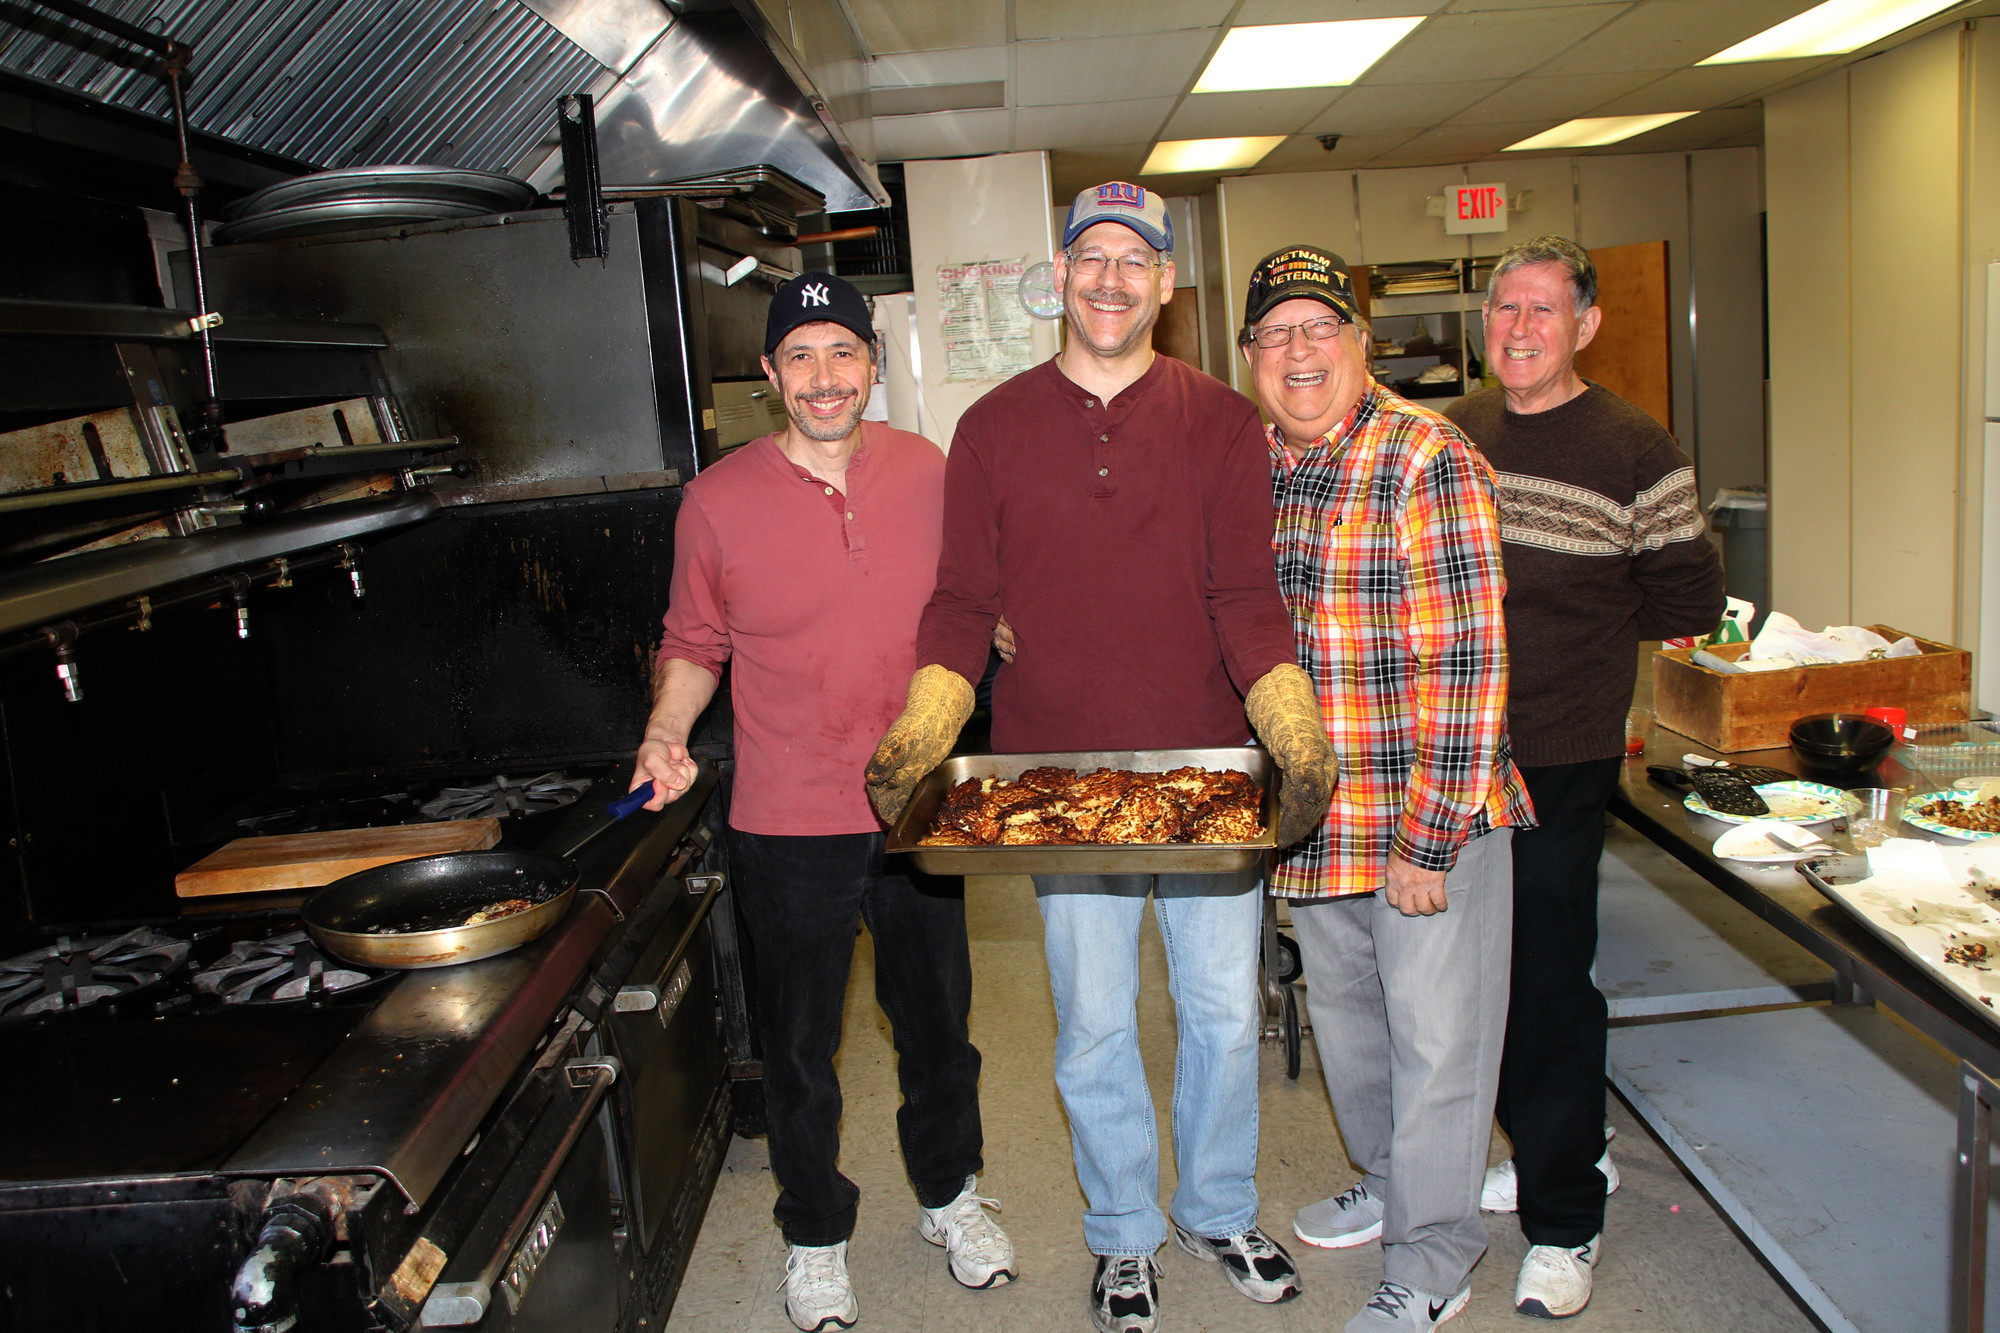 Volunteers from the Brotherhood prepared the latkes for all to enjoy.